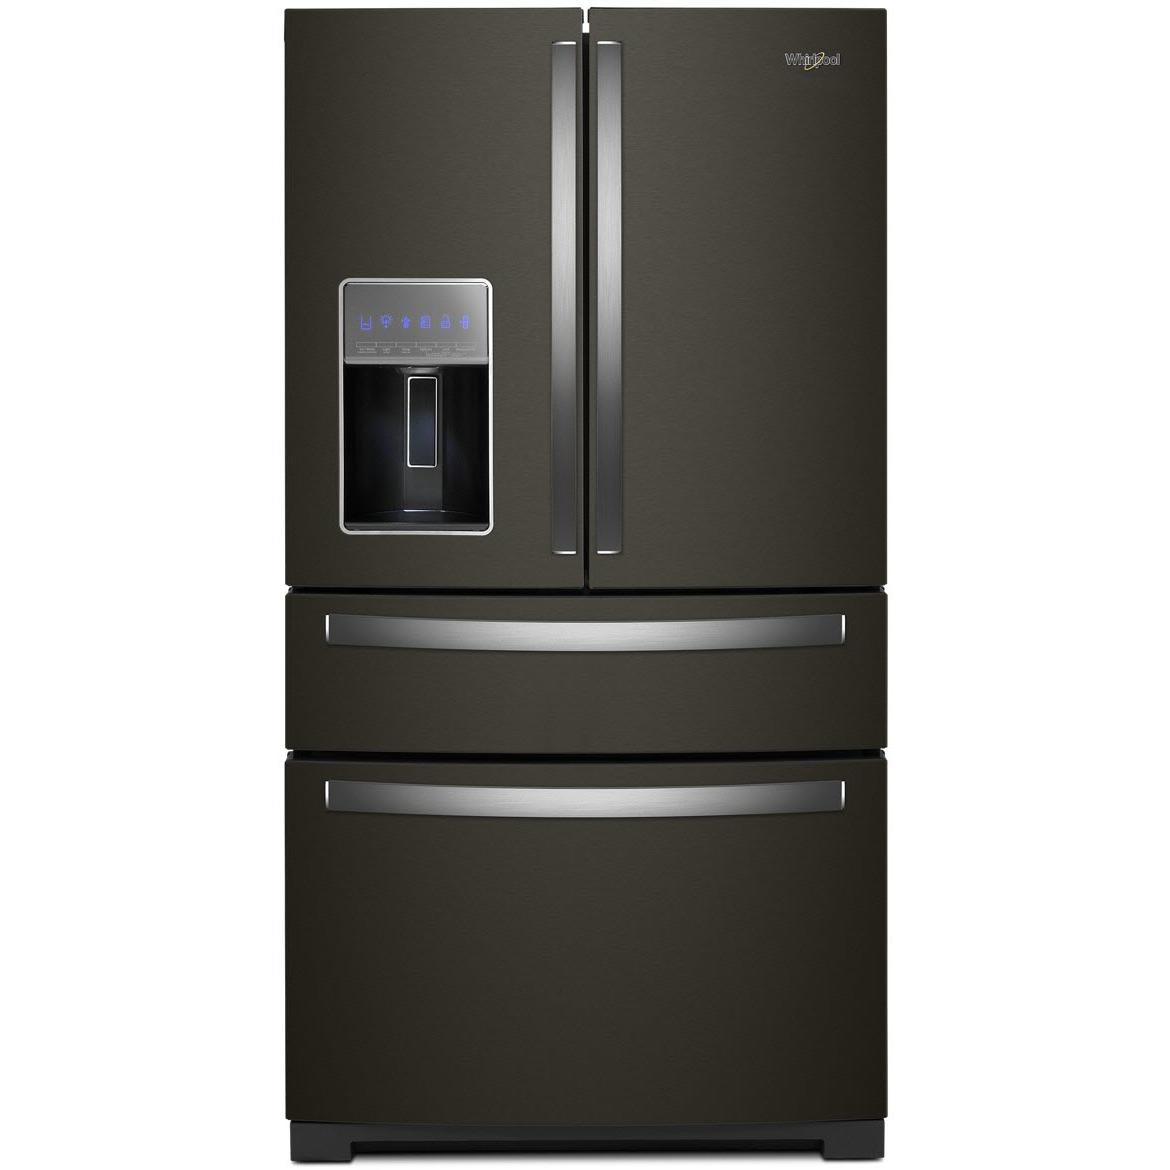 36-inch, 26.2 cu. ft. French 4-Door Refrigerator with External Water and Ice Dispensing System WRMF7736PV IMAGE 1